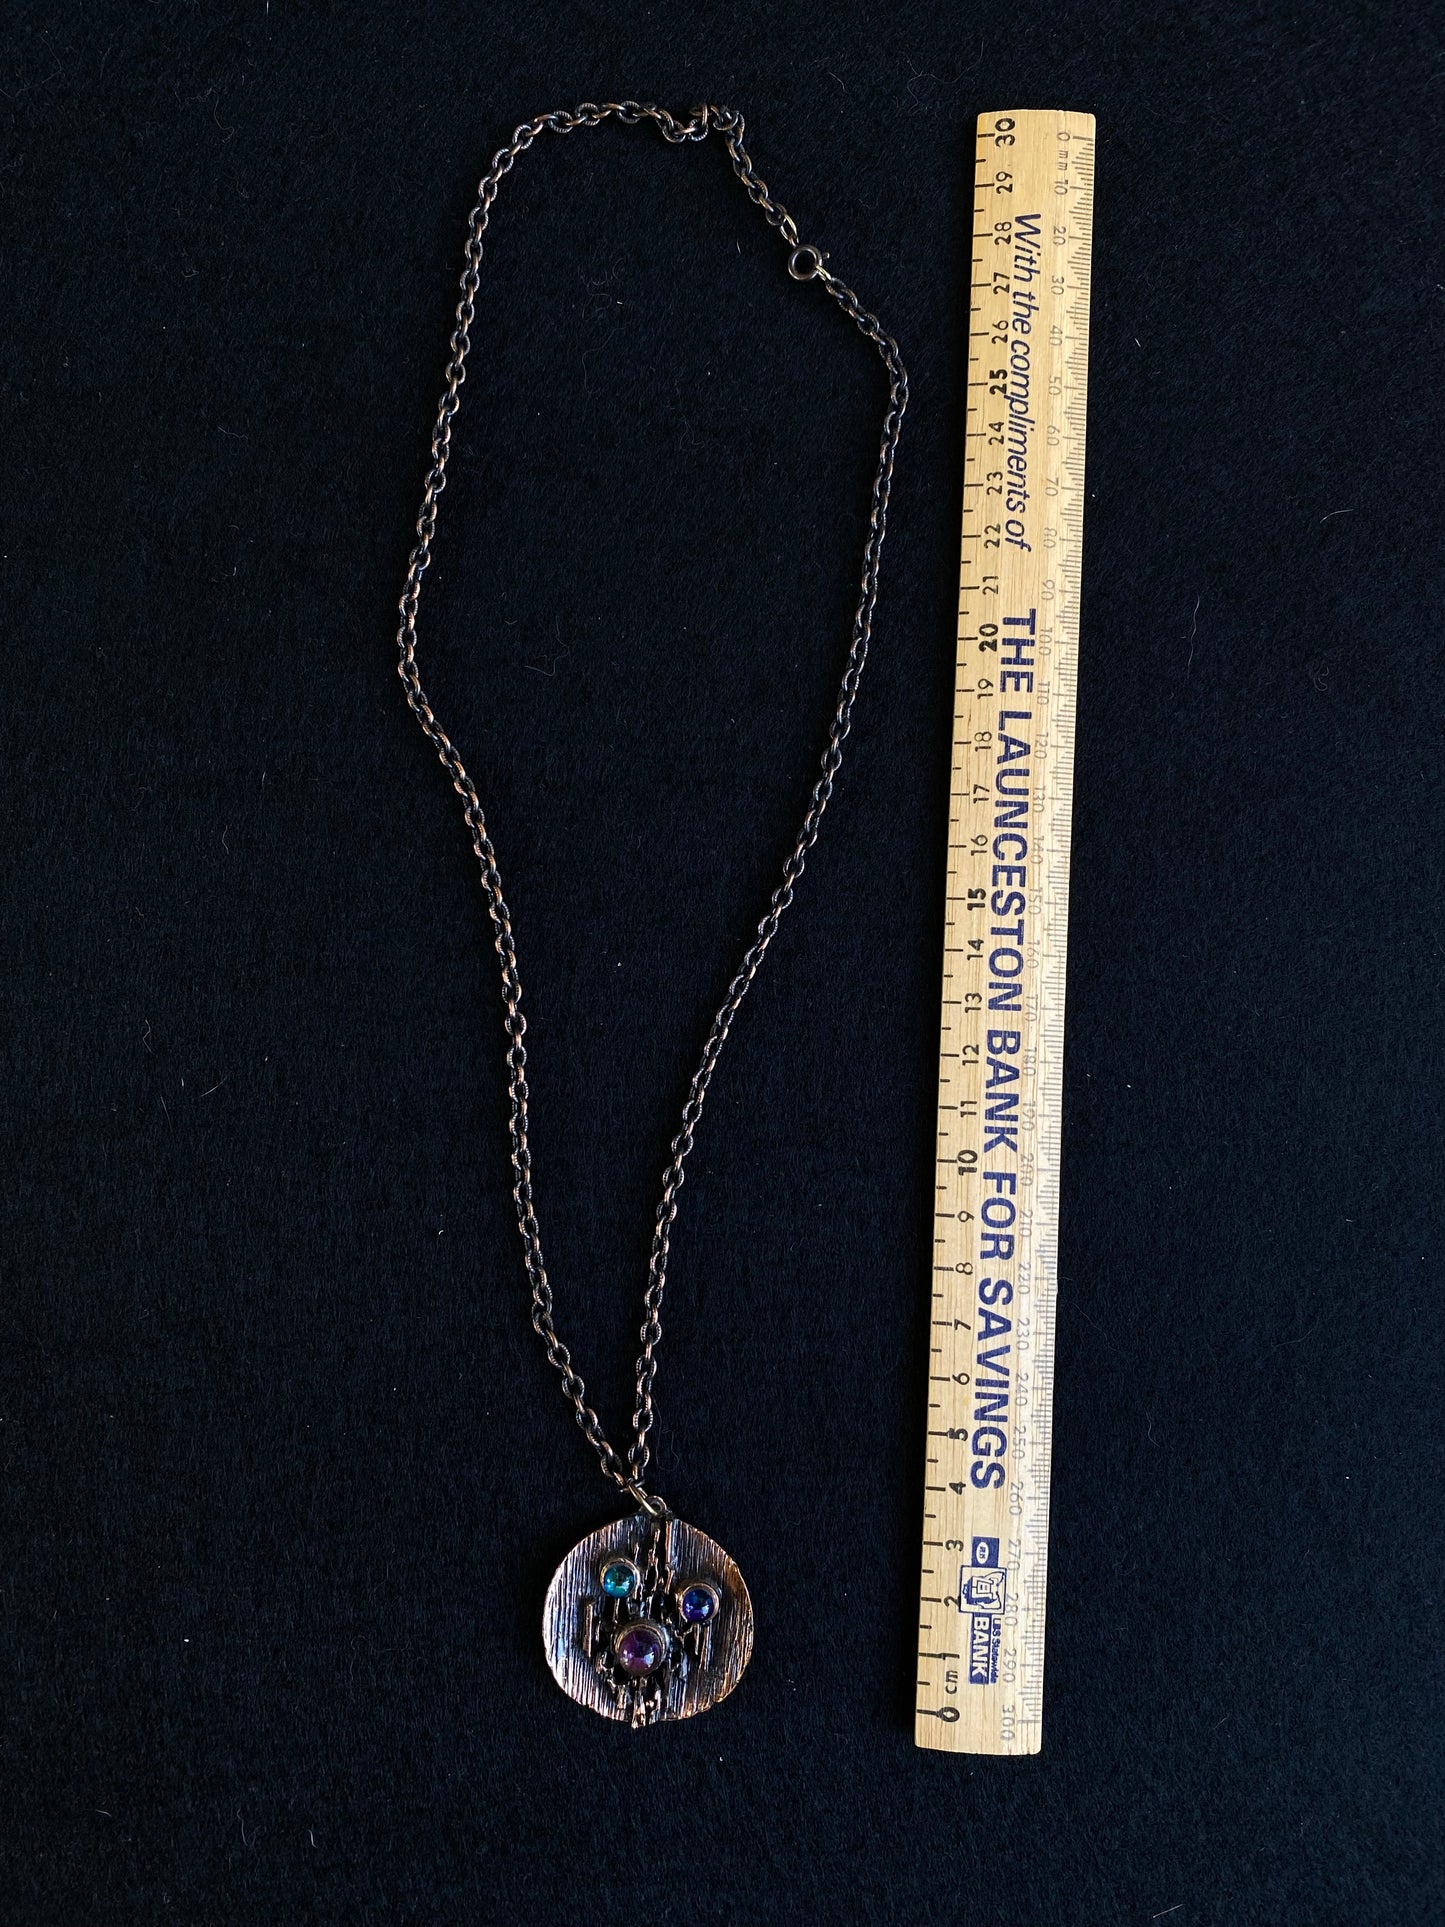 Retro long necklace and circle pendant